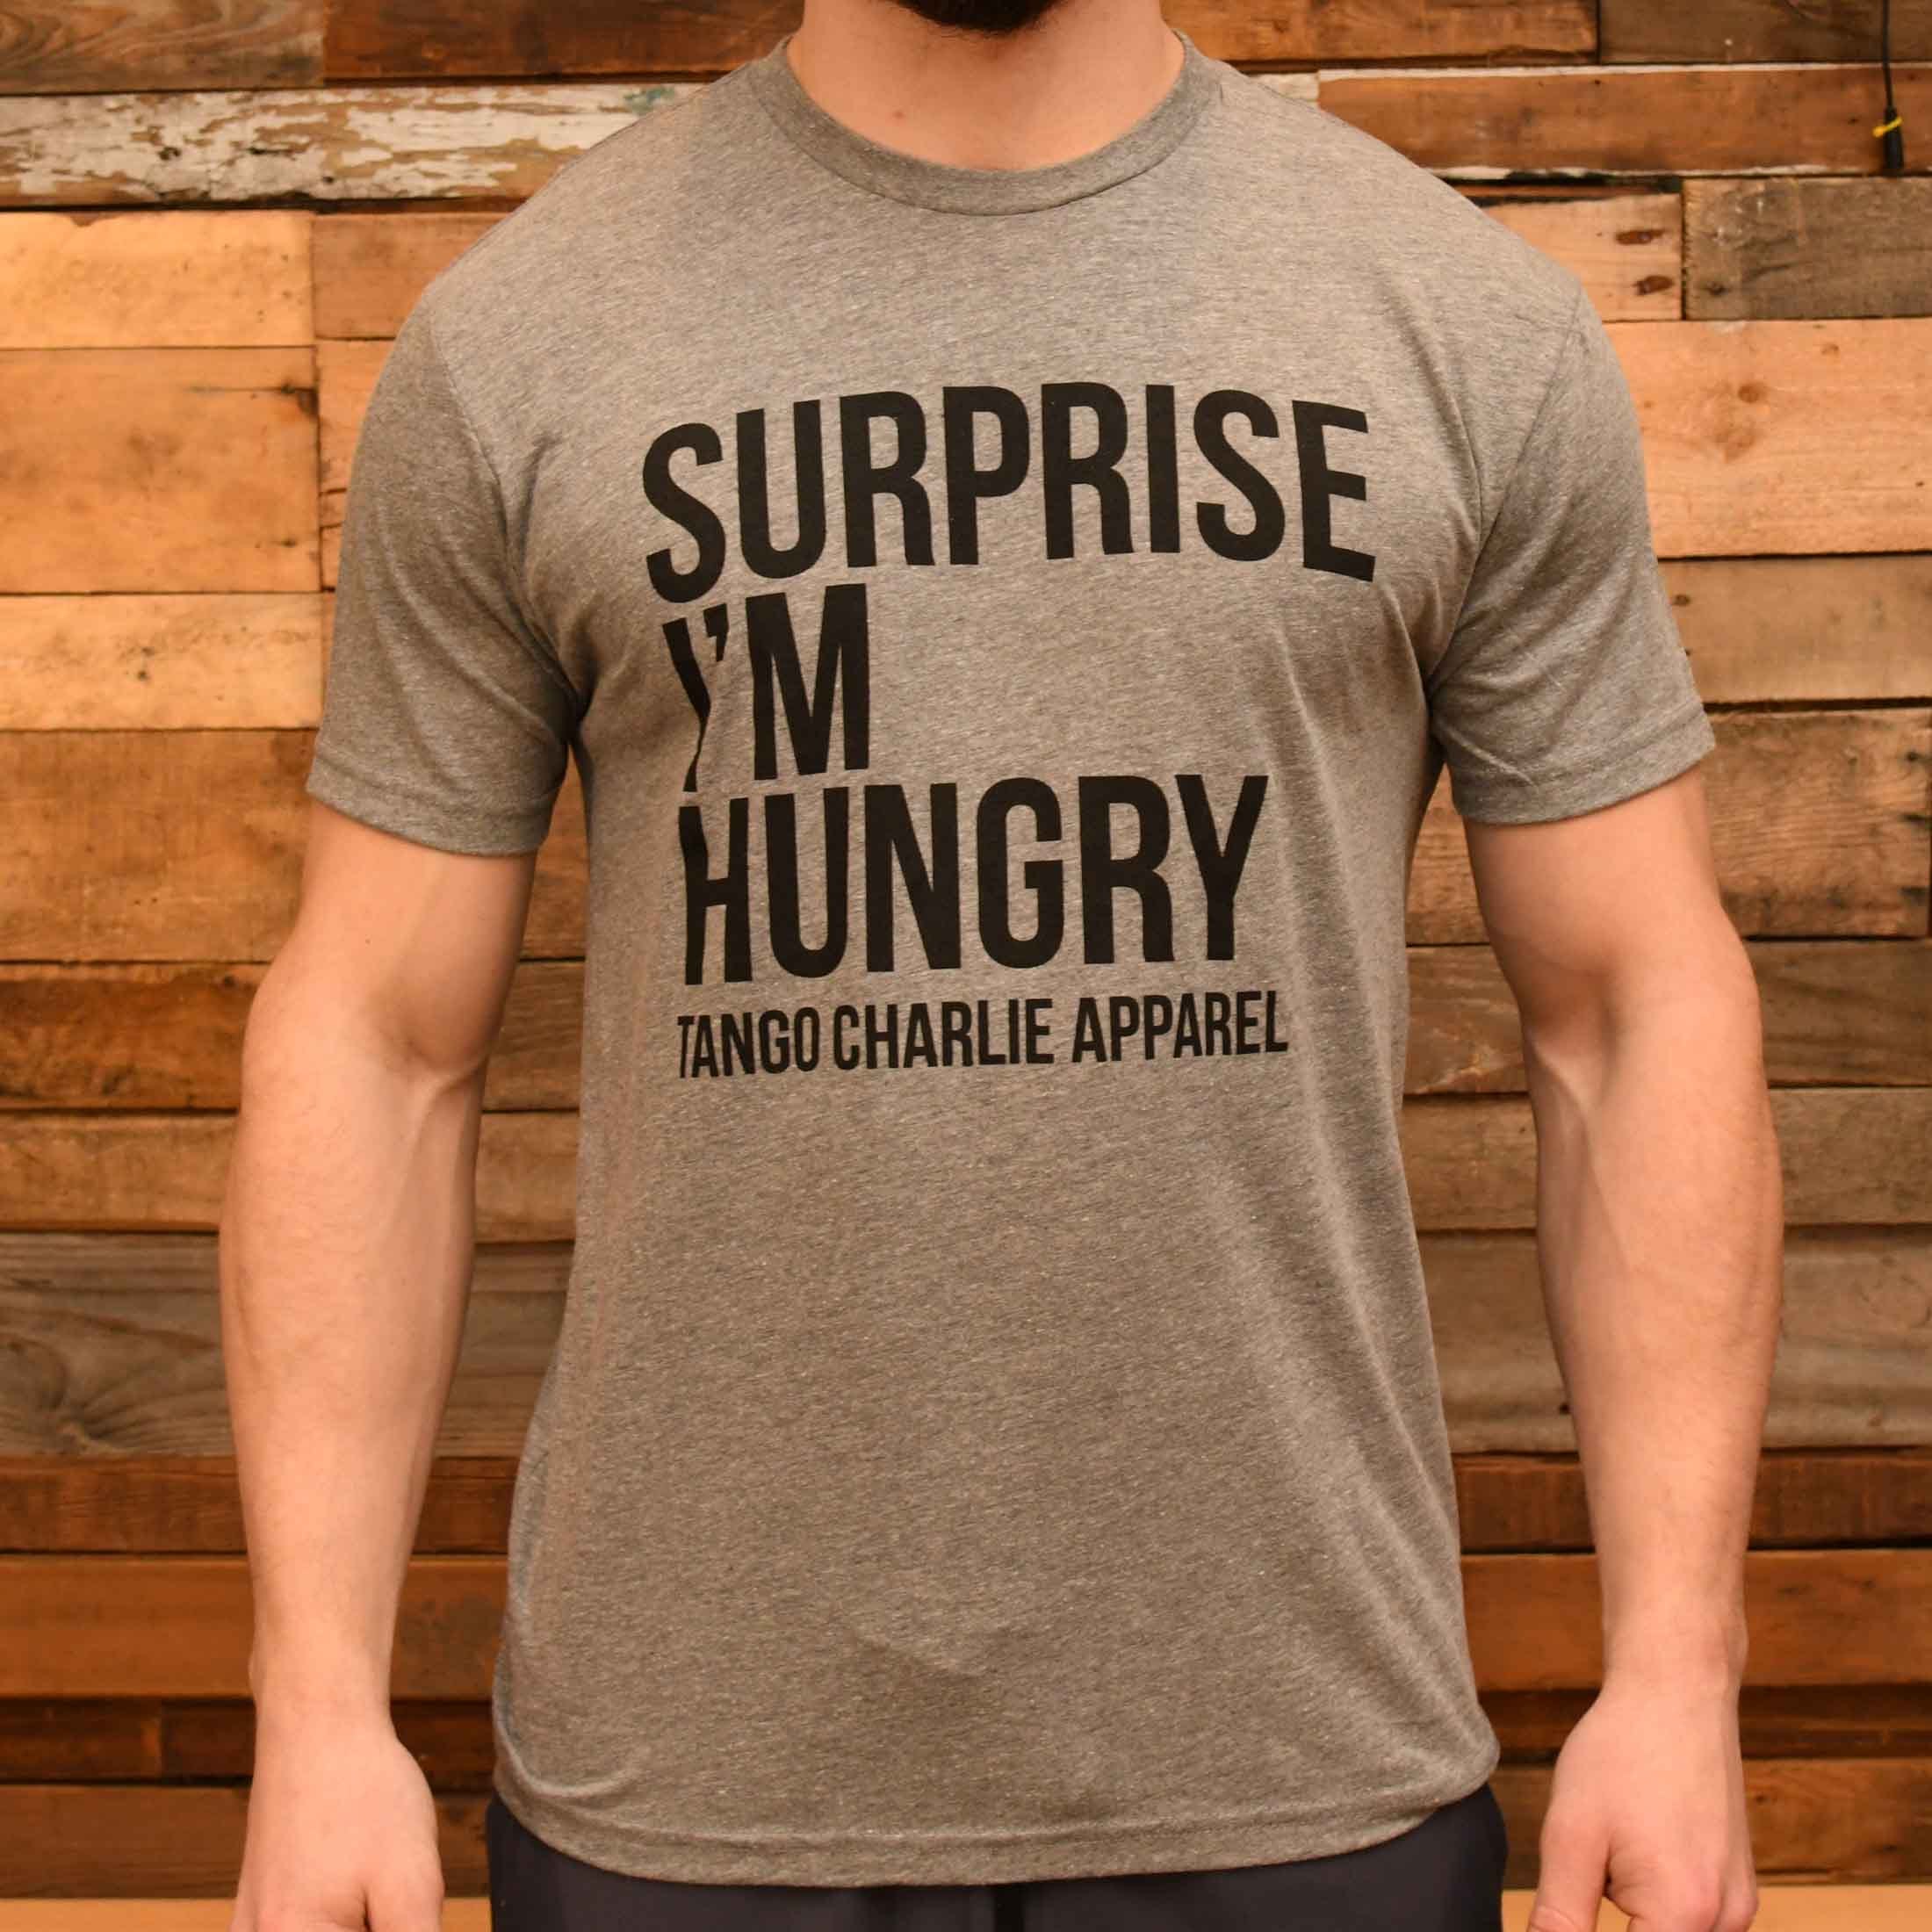 "Surprise, I'm Hungry" - Men's Tee